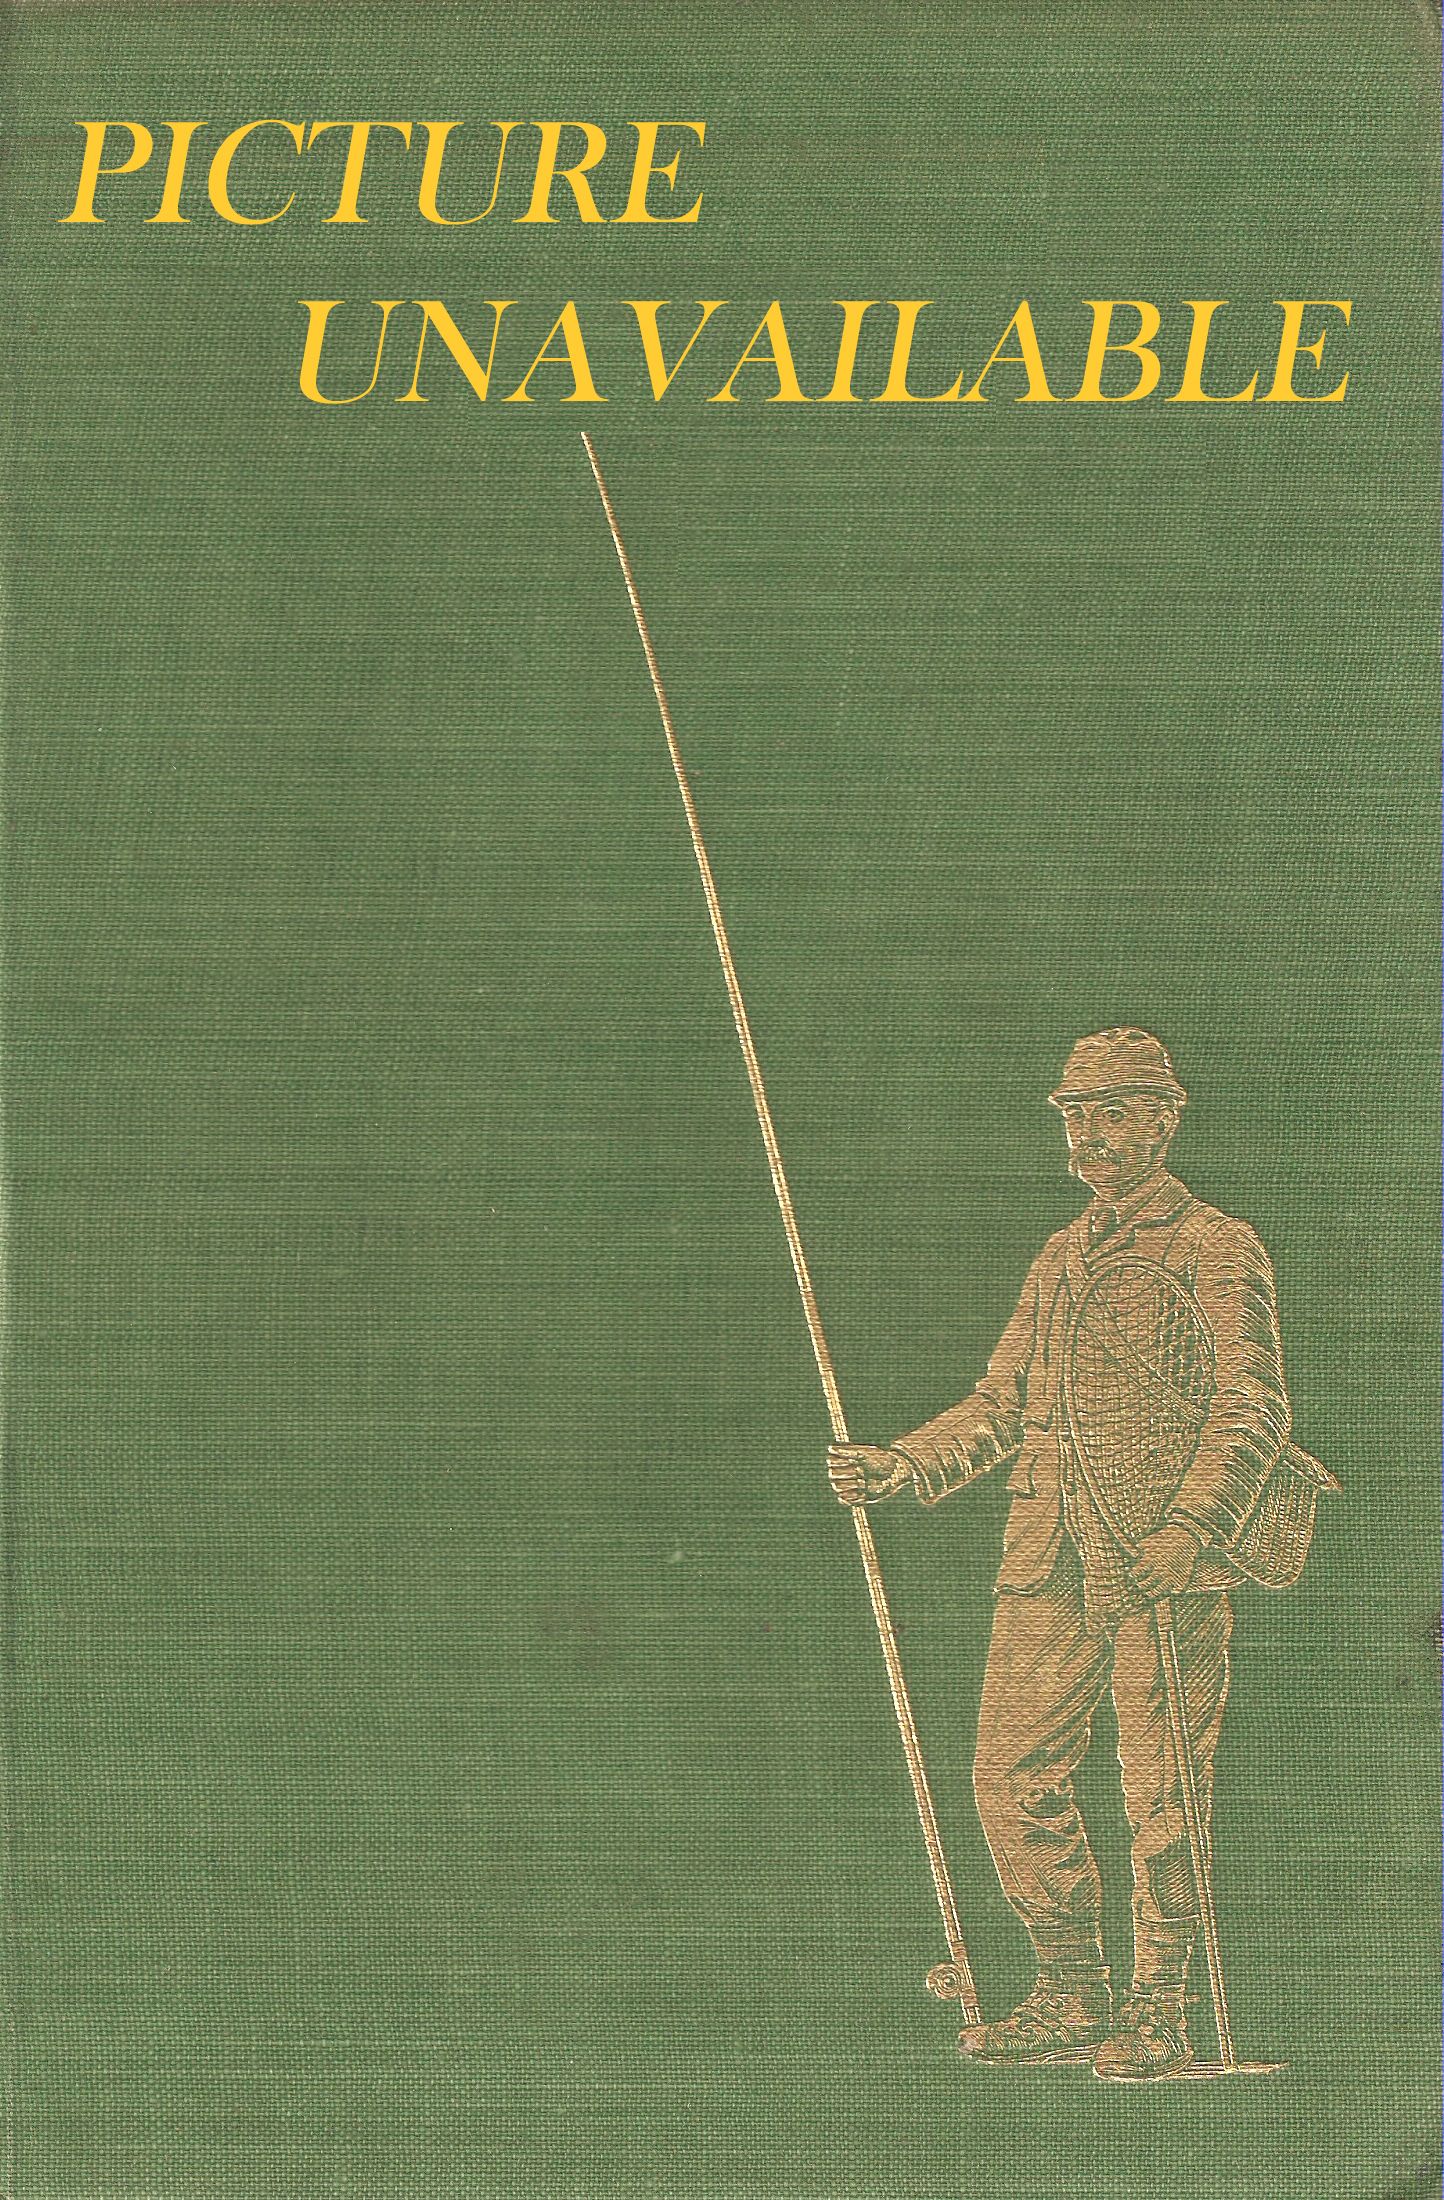 COARSE FISHING: THEORY AND PRACTICE. By J.G. Roberts. Series editor  Kenneth Mansfield.